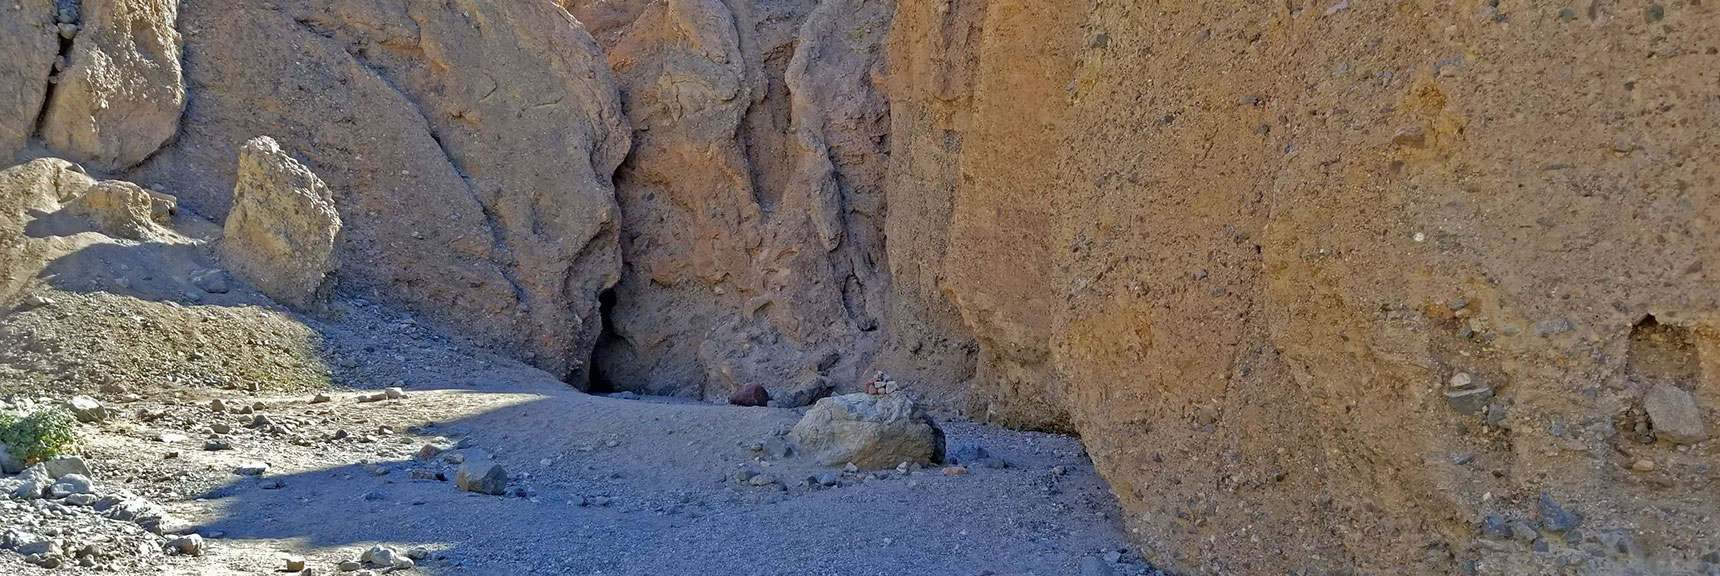 Second Major Slot Entrance, Cairn Marking the Spot | Sidewinder Canyon | Death Valley National Park, California